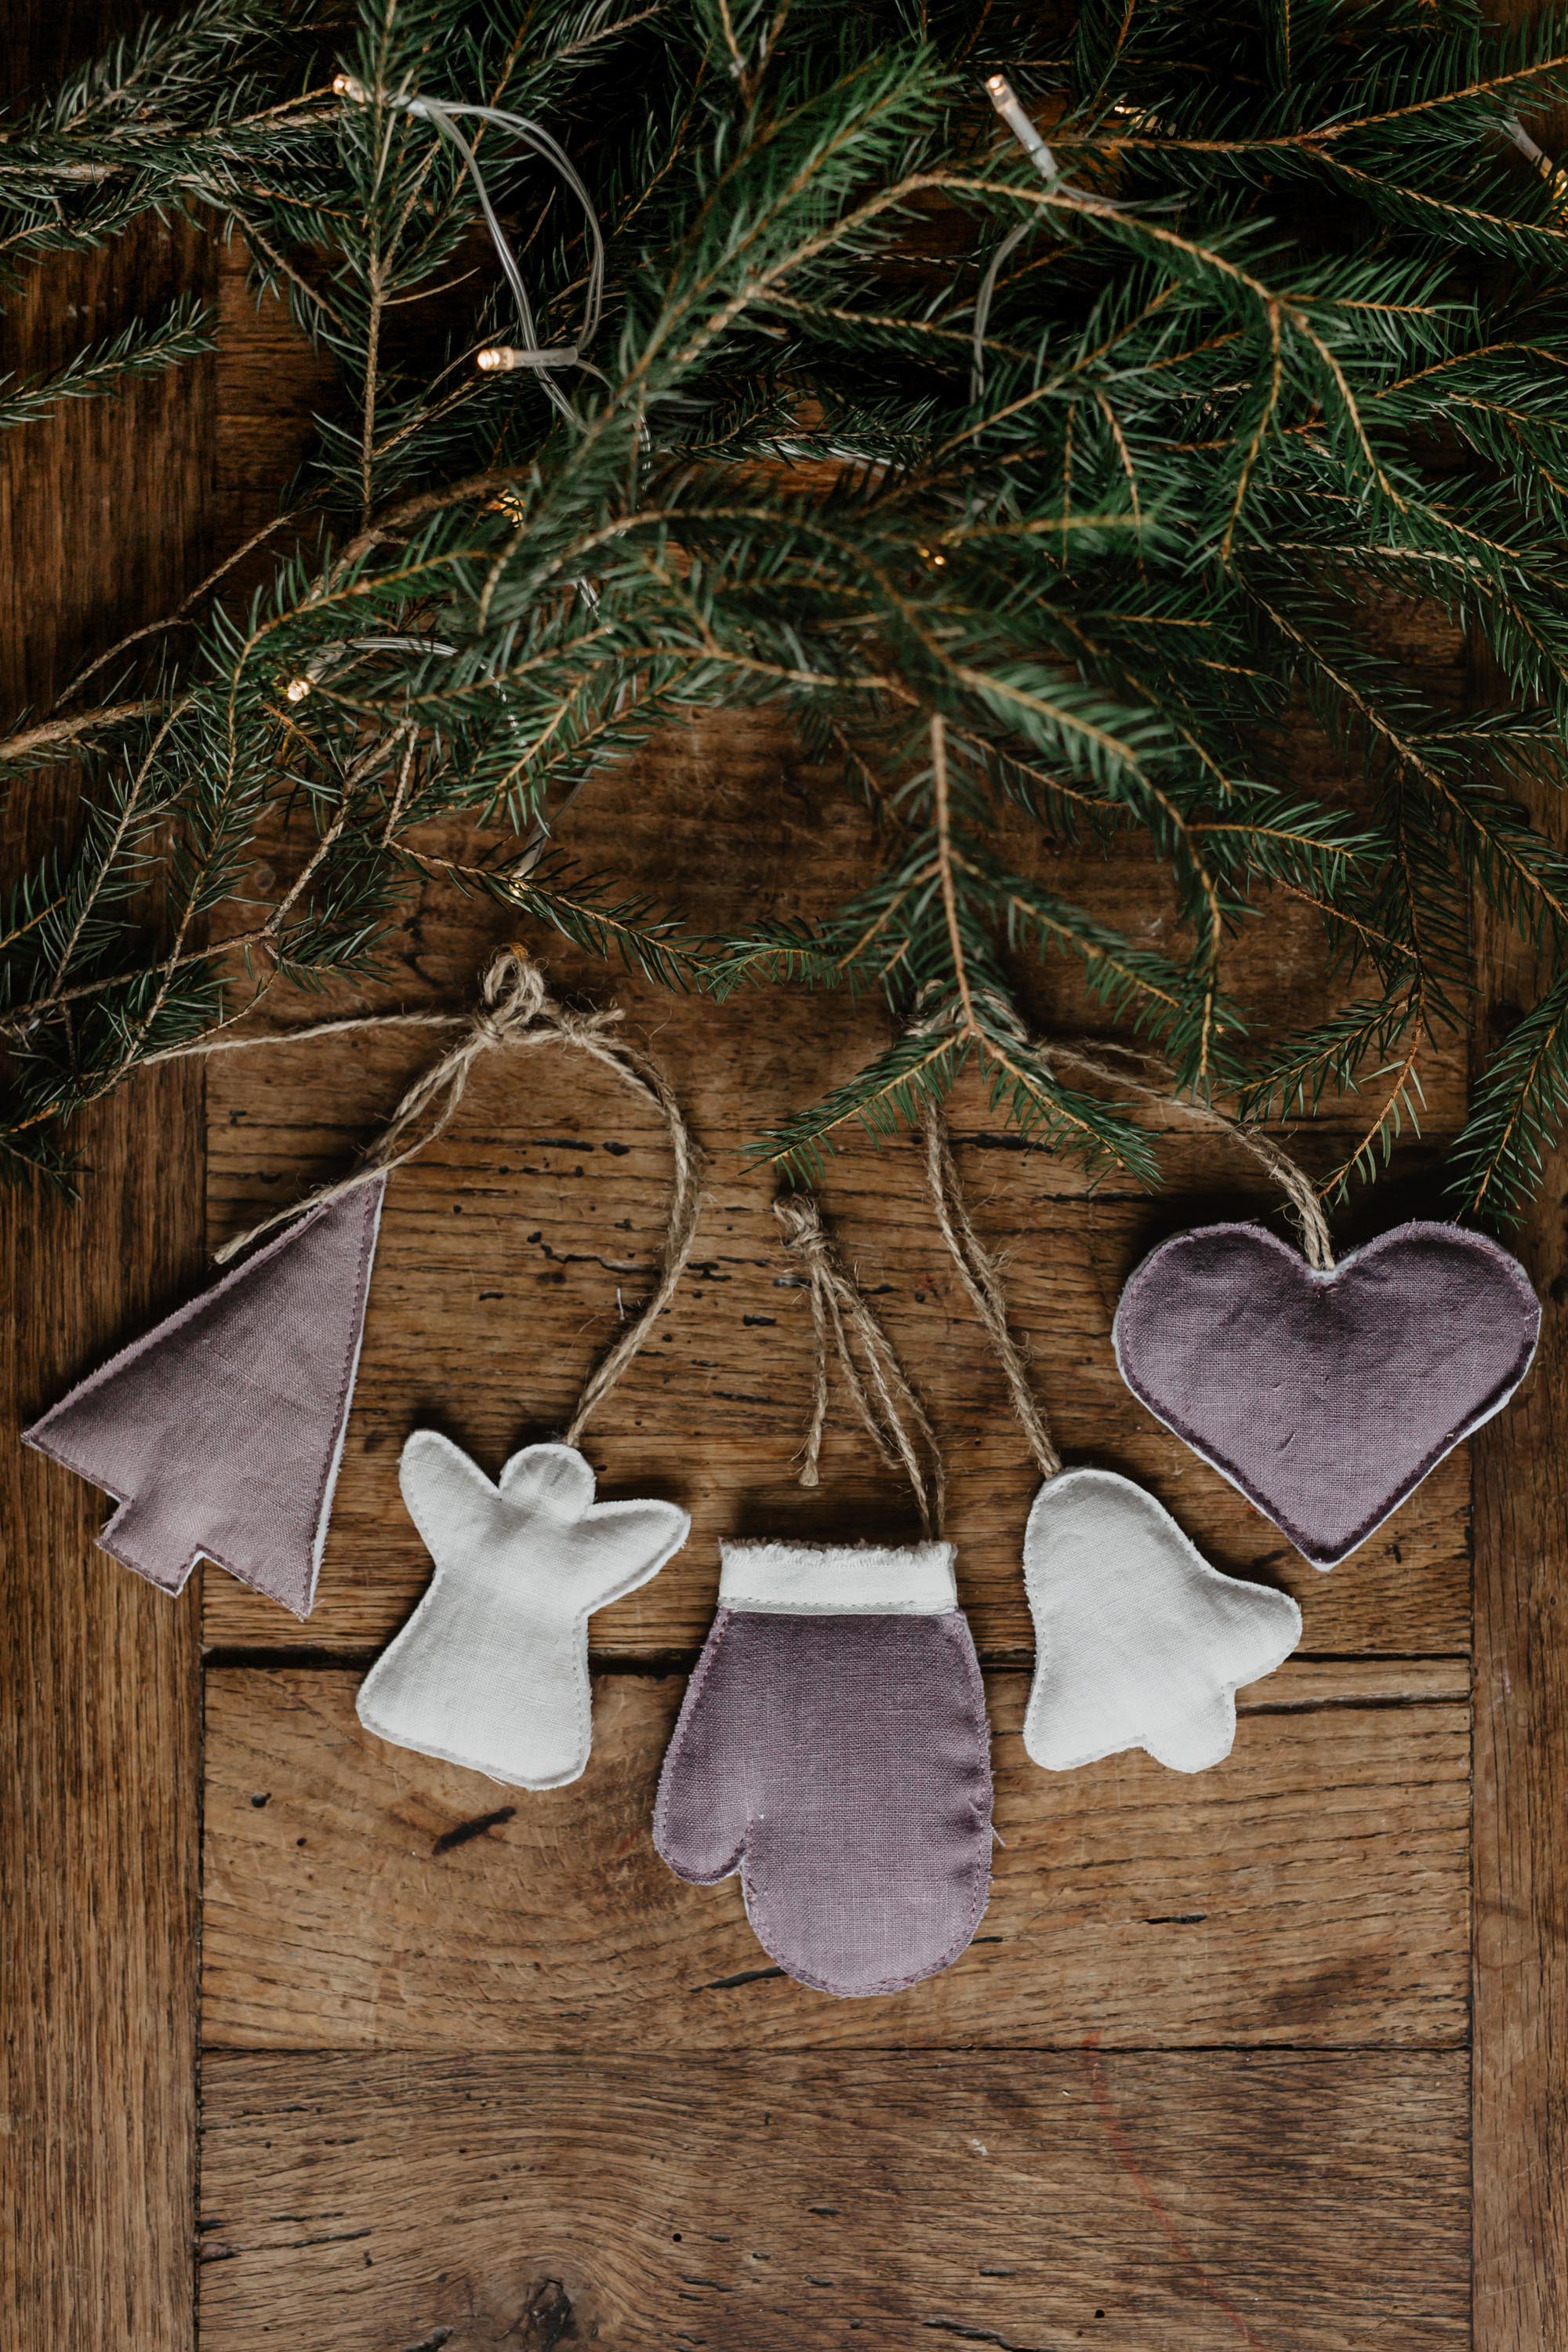 Light Linen Christmas Tree Decorations Created From Zero-Waste